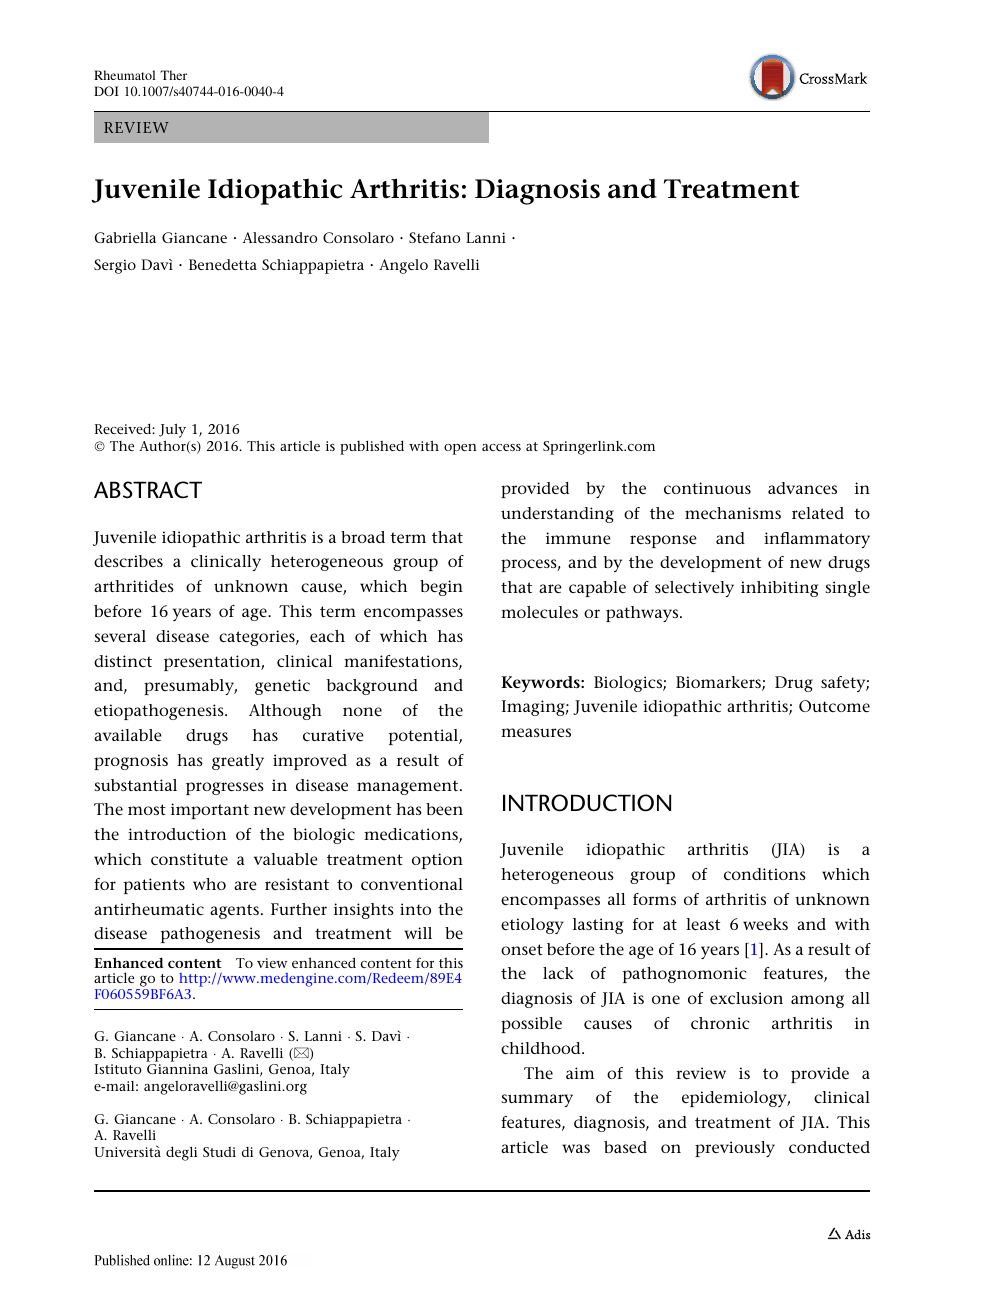 Evaluation of 21-Numbered Circle and 10-Centimeter Horizontal Line Visual Analog  Scales for Physician and Parent Subjective Ratings in Juvenile Idiopathic  Arthritis